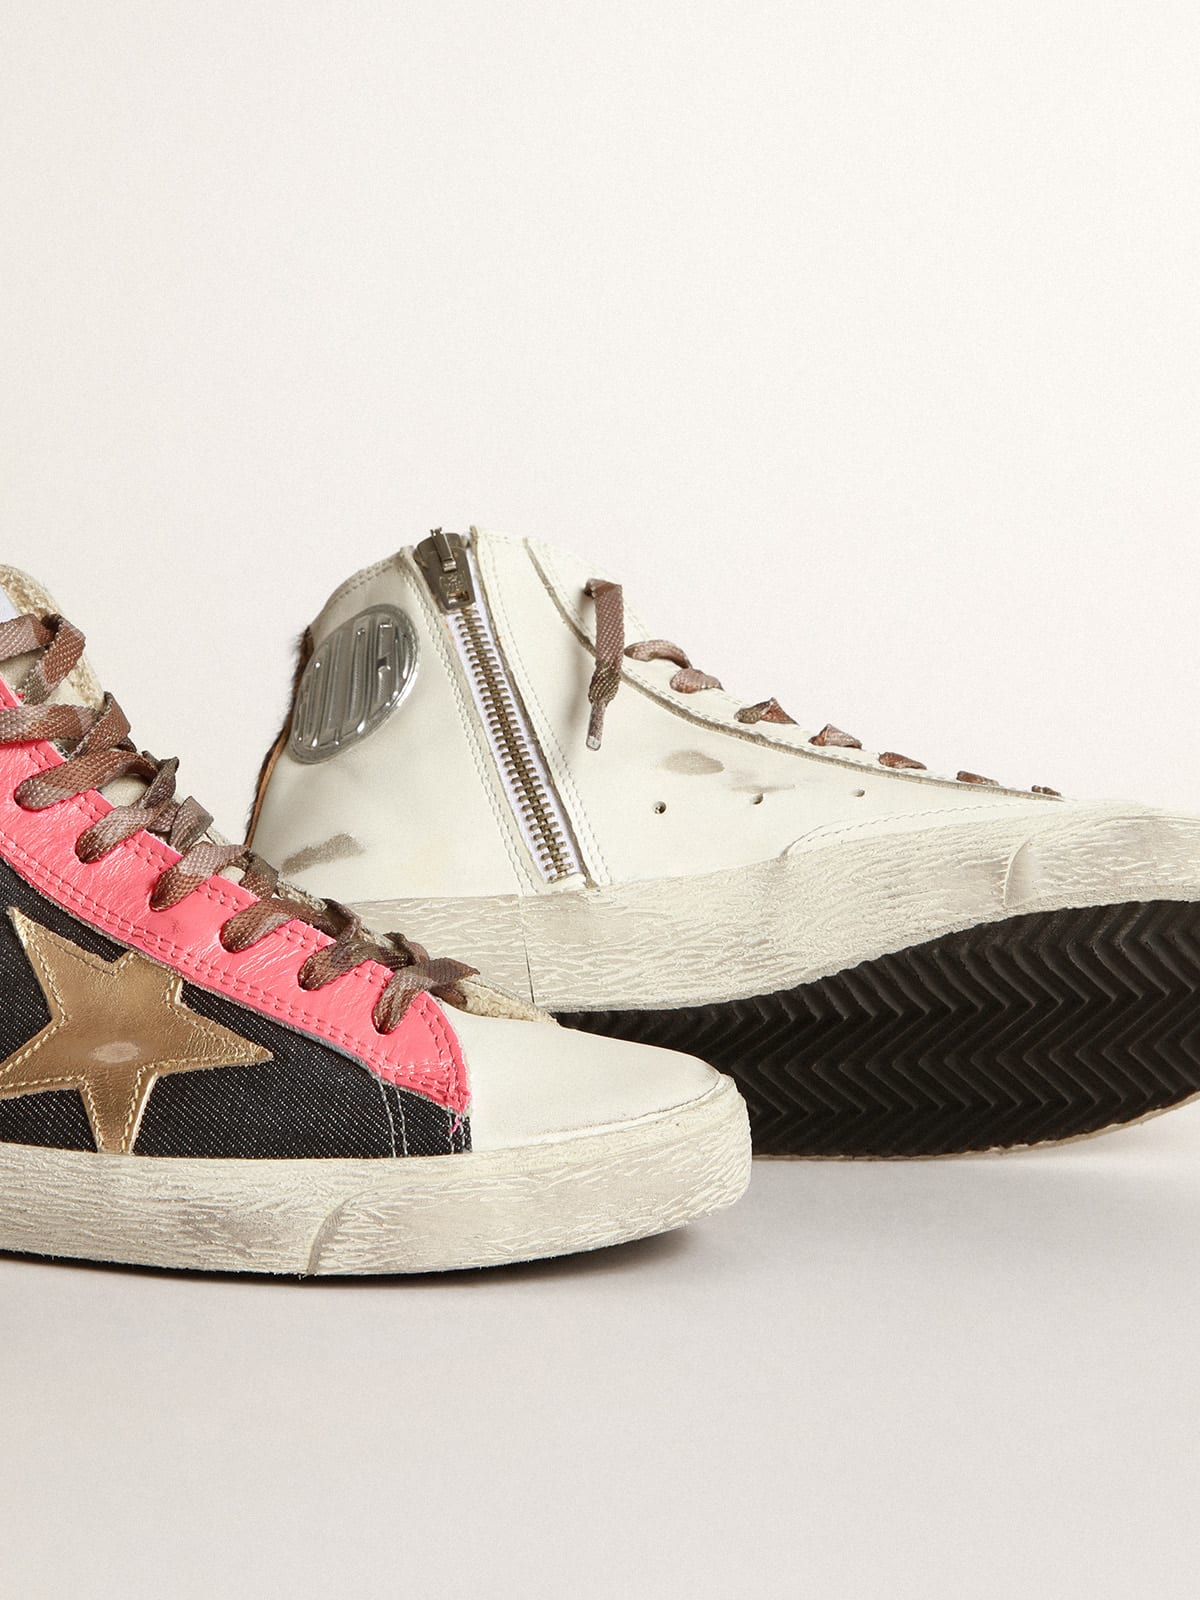 Golden Goose - Men’s Francy LTD sneakers in white leather and black denim with gold laminated leather star in 